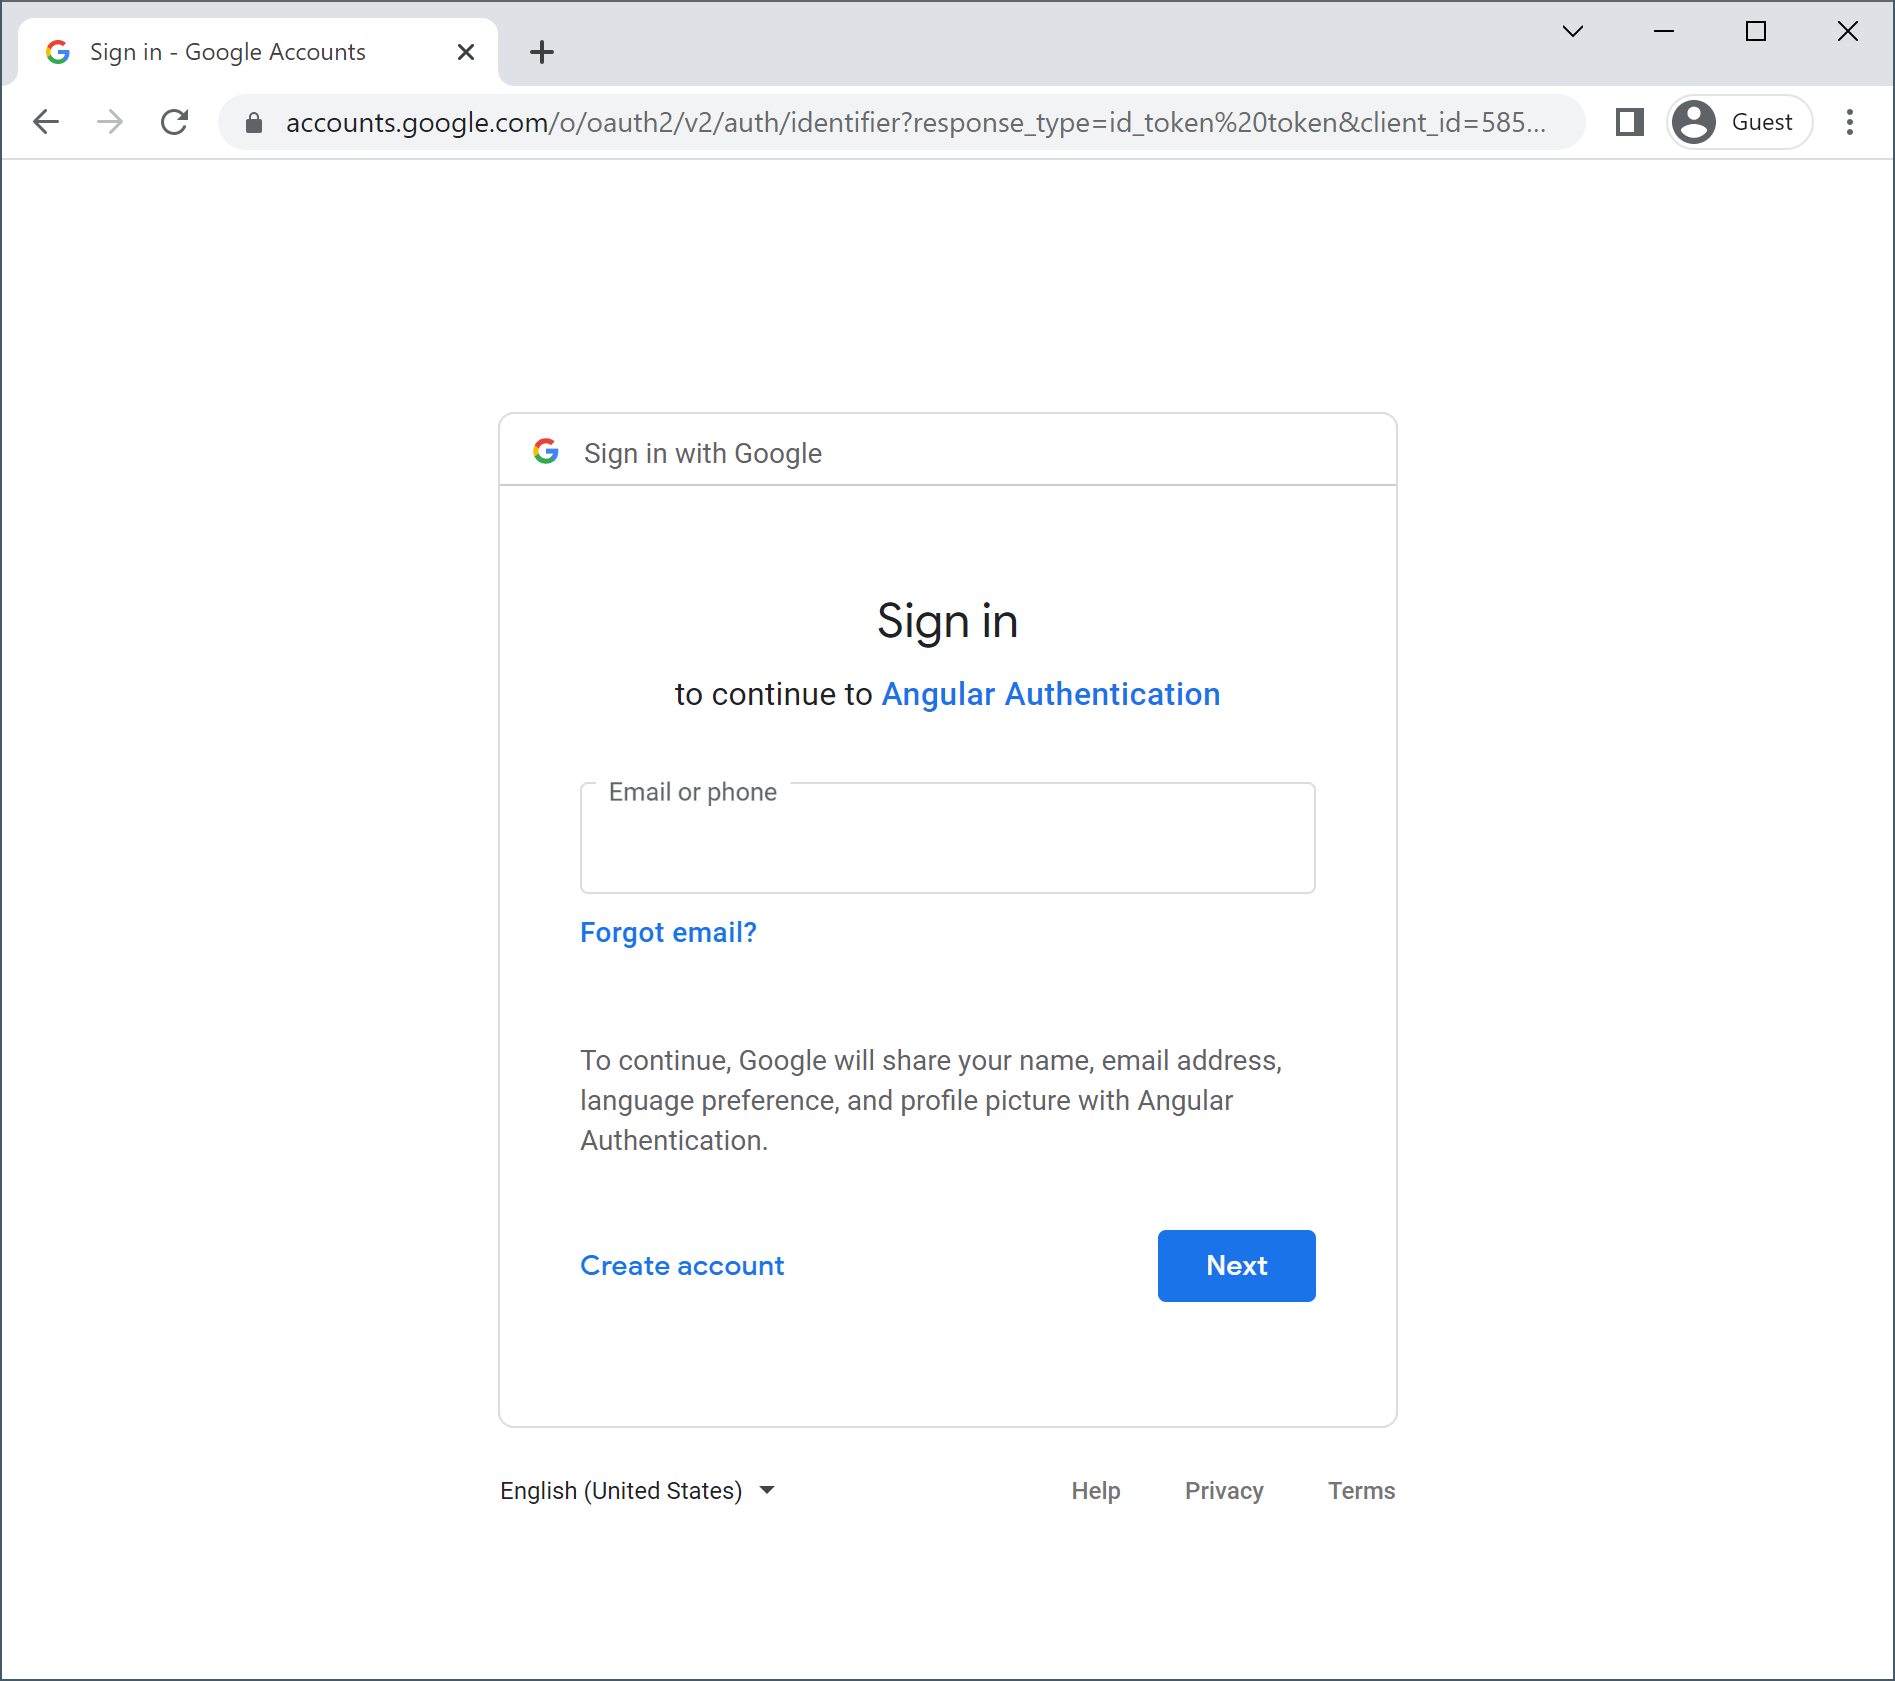 Google Sign in form with our application name